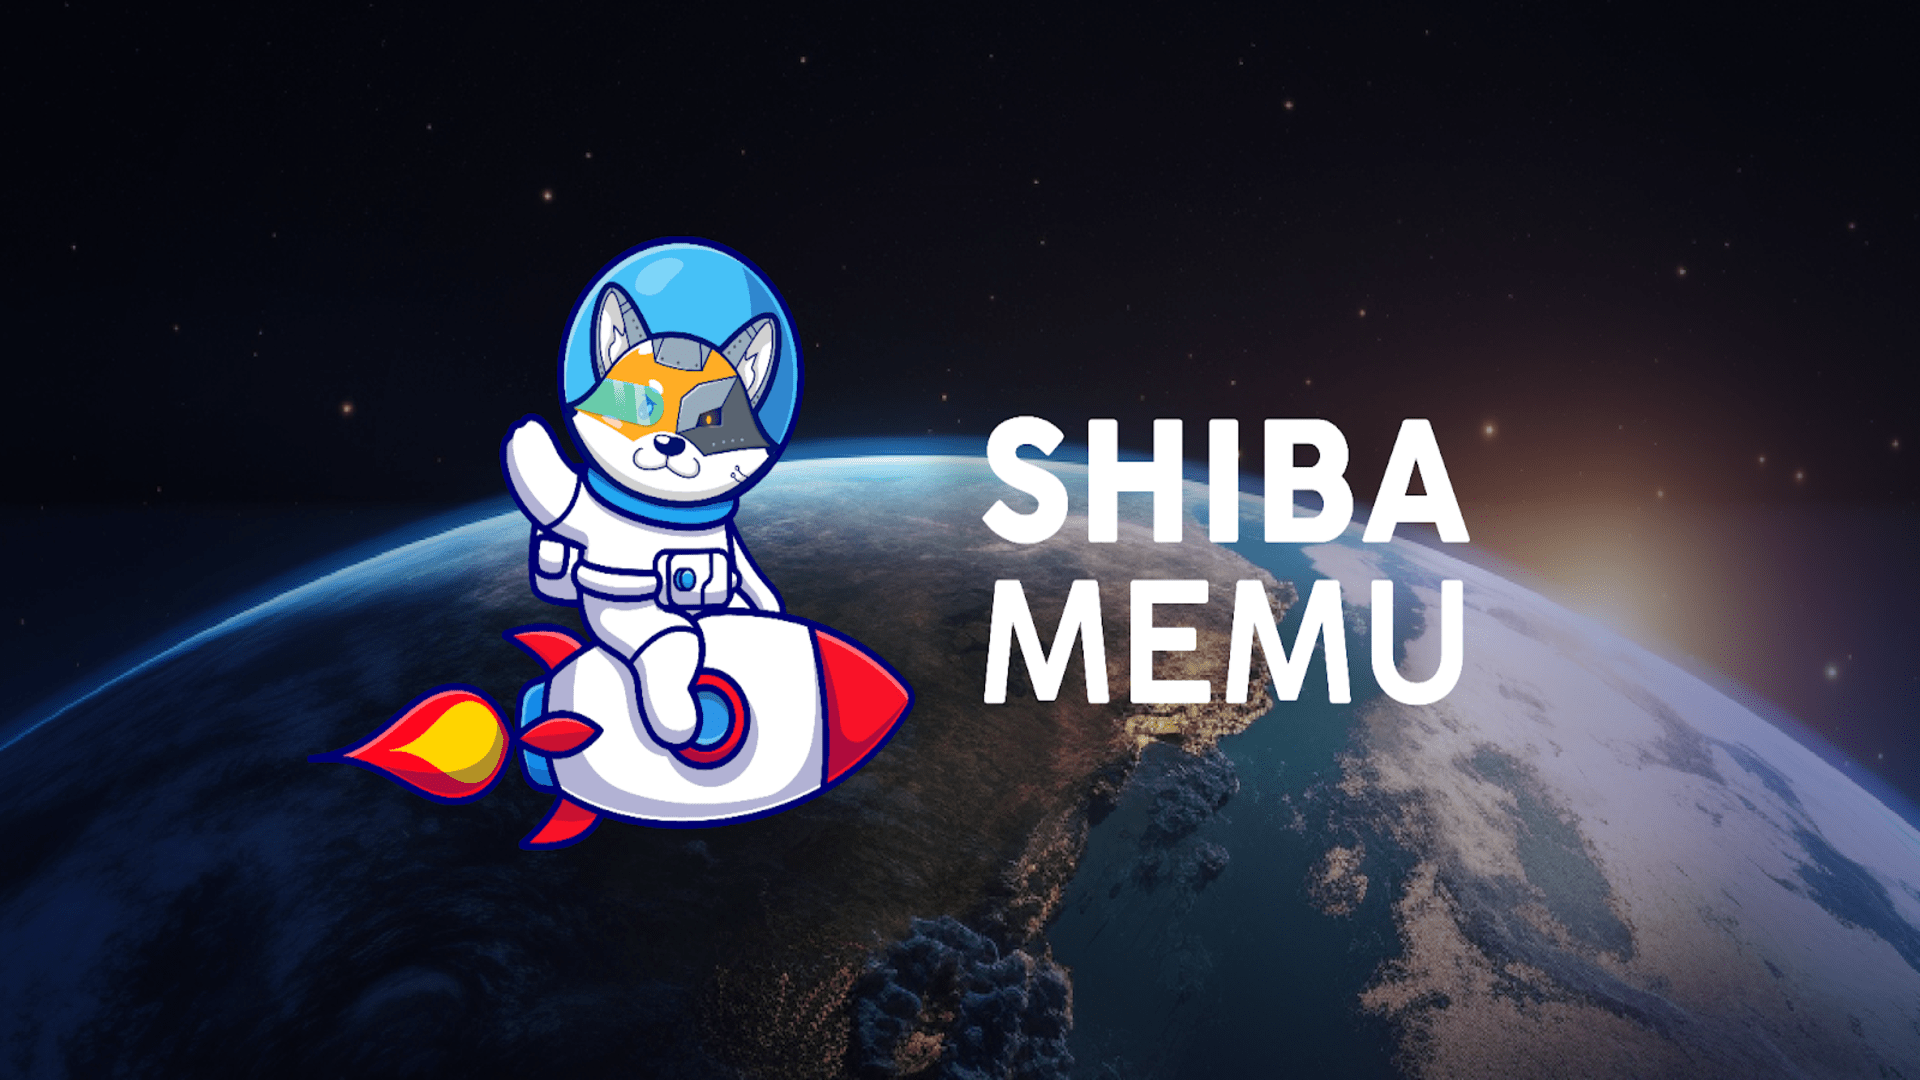 From ICO to the Moon? Shiba Memu’s Potential Path as Best Meme Coin Explored